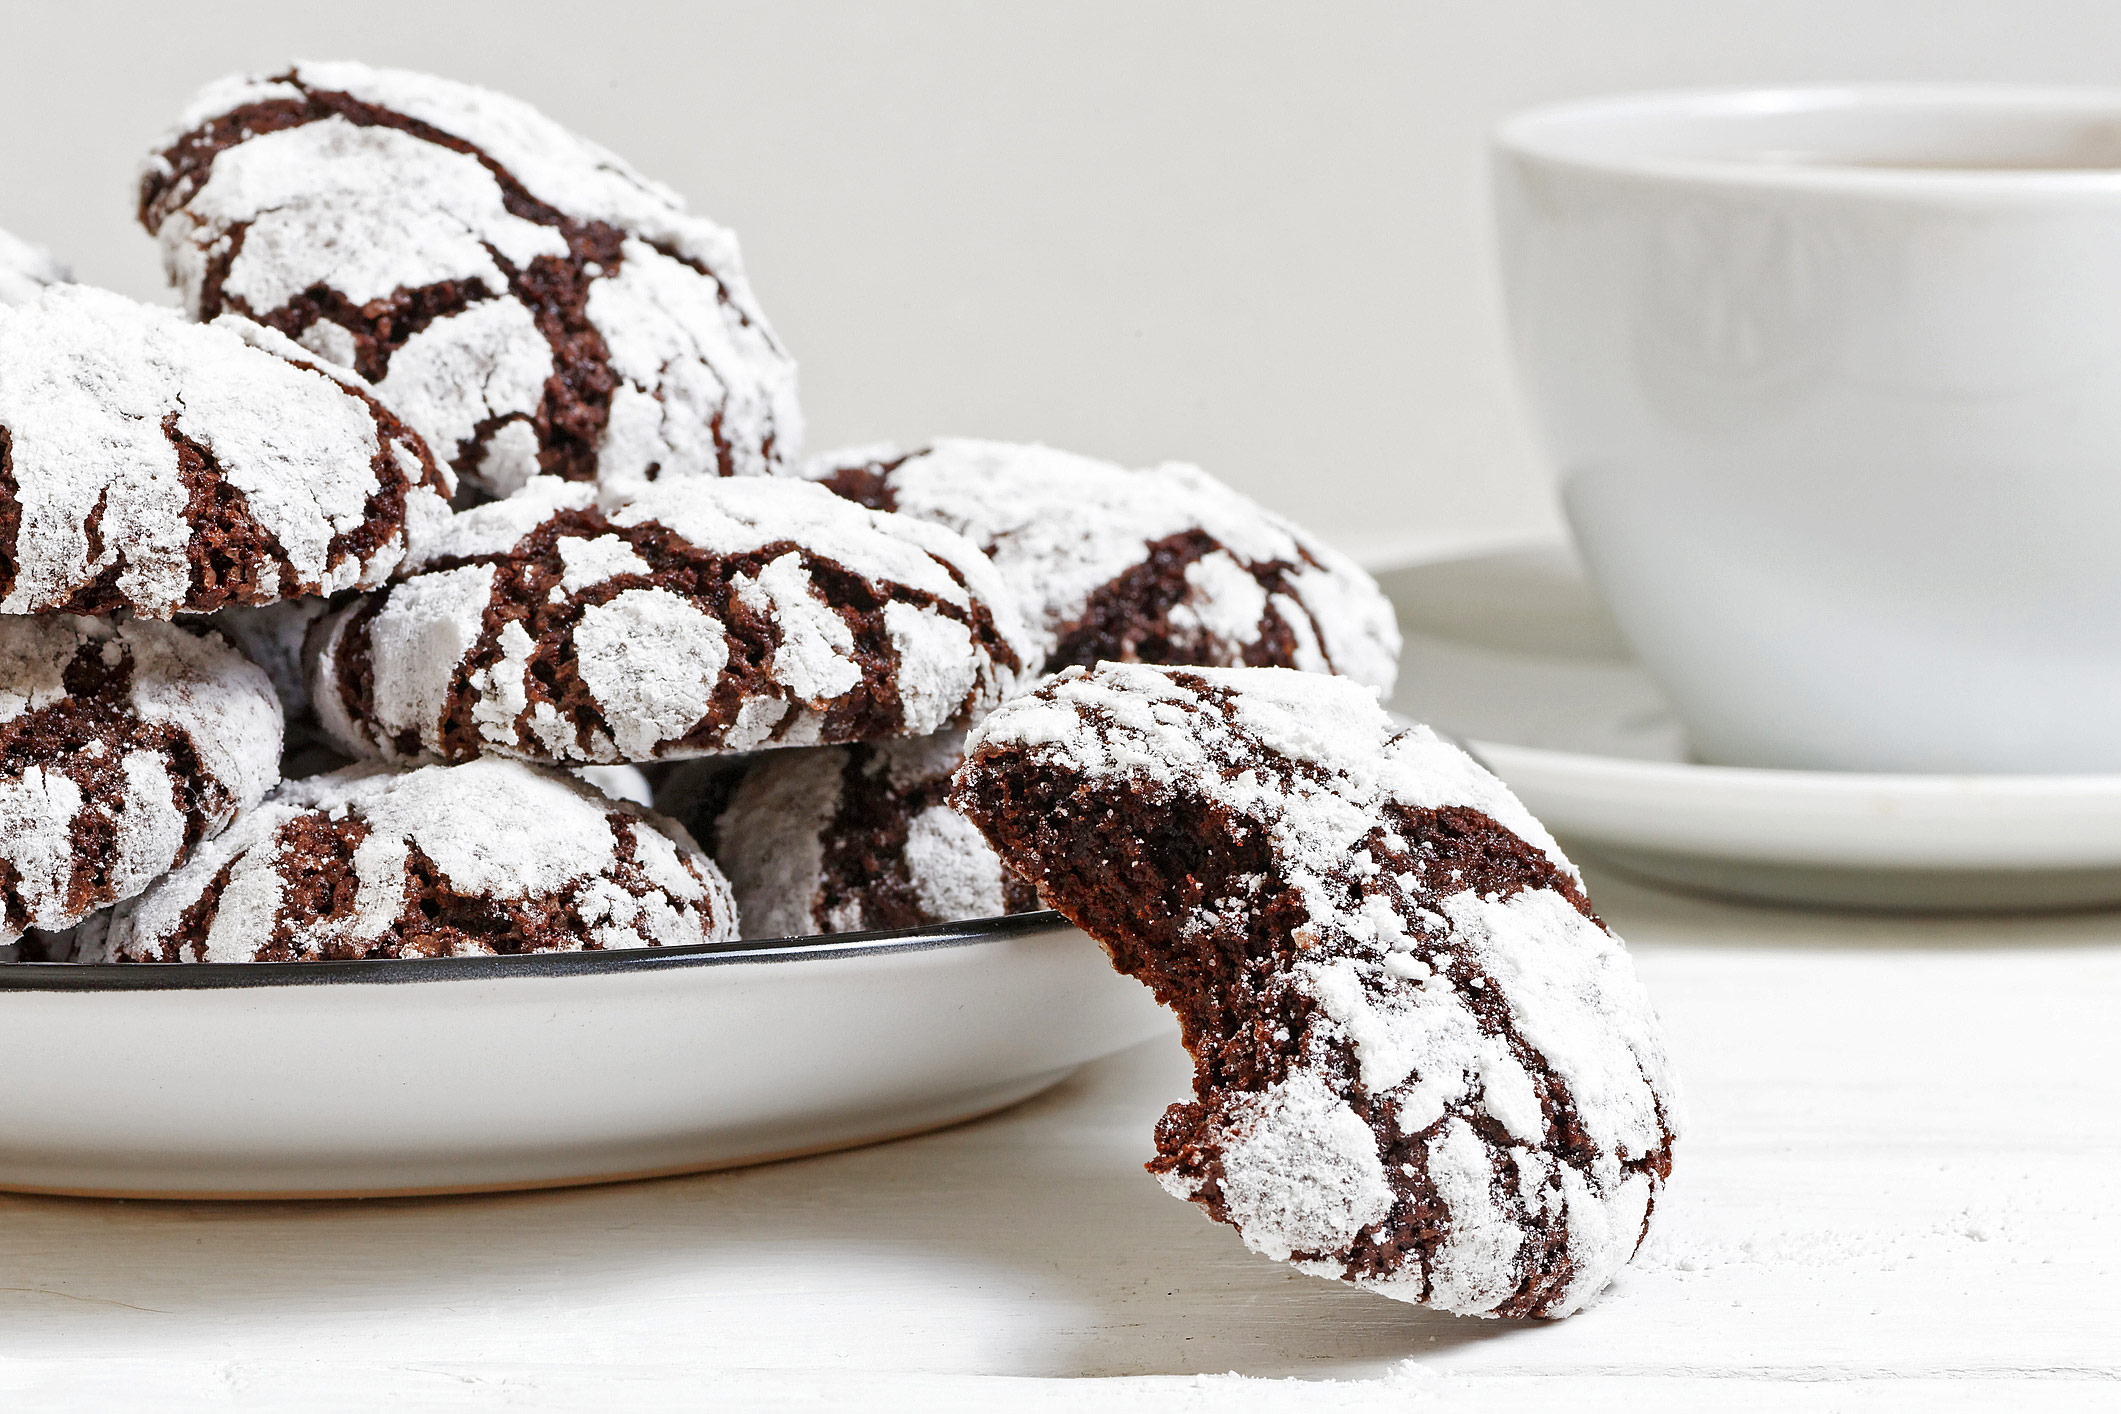 Stacks of crinkle cookies on white plate and white background, some with chocolate chunks around the base; Fudge Drop Crinkle Cookies, Jane Bonacci, The Heritage Cook. 